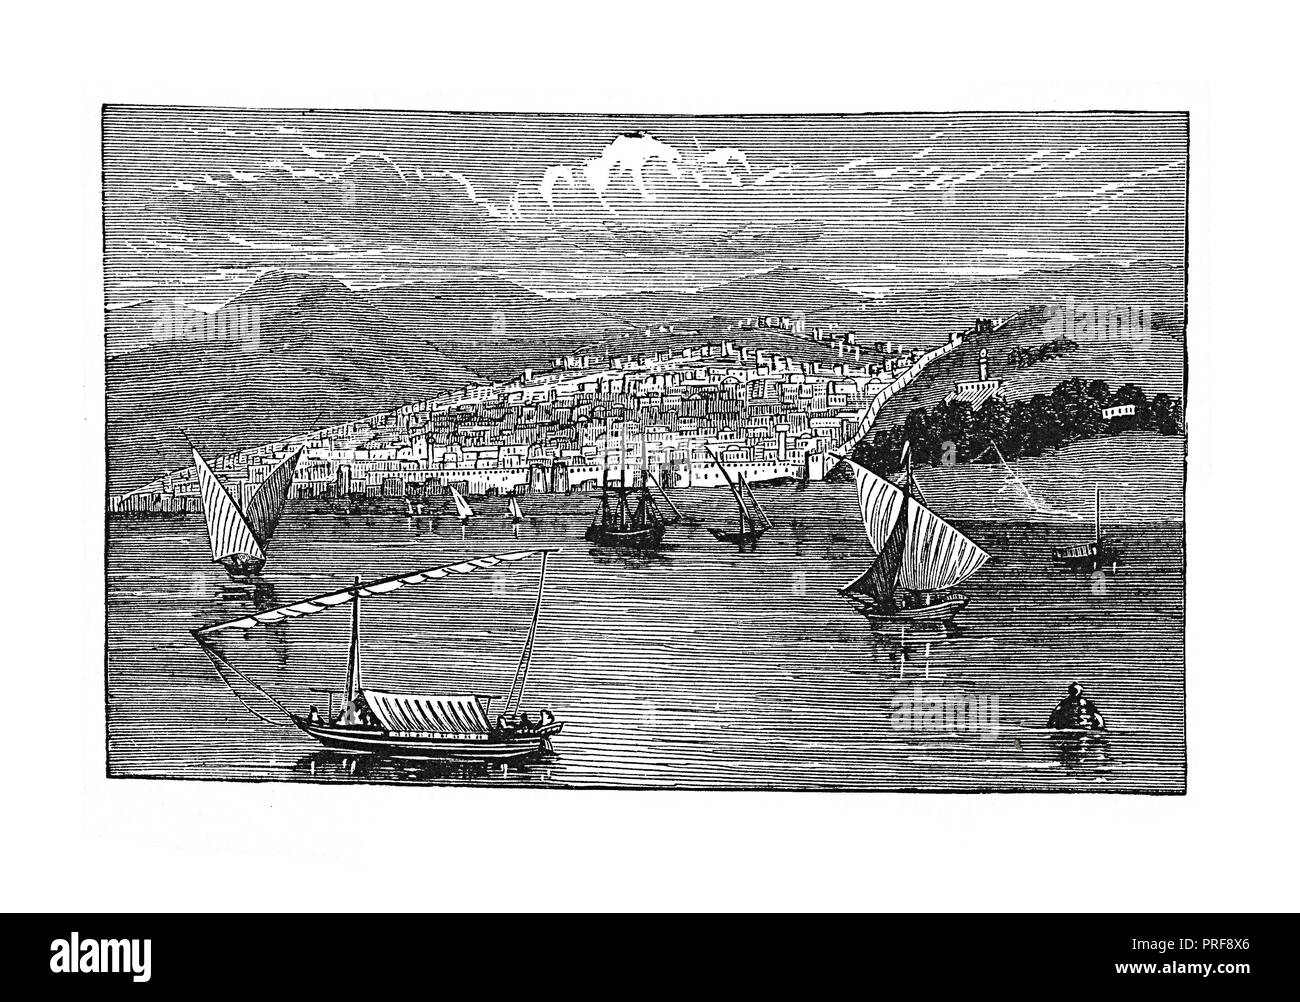 Original artwork (engraving) of the city of Thessalonica (Thessaloniki), Macedonia, Northern Greece. General view of the city with Thessaloniki Bay, panorama of the city and ships and boats. Published in A pictorial history of the world's great nations: from the earliest dates to the present times. (Charlotte M. Yonge Selmar Hess, New York, 1882). Stock Photo